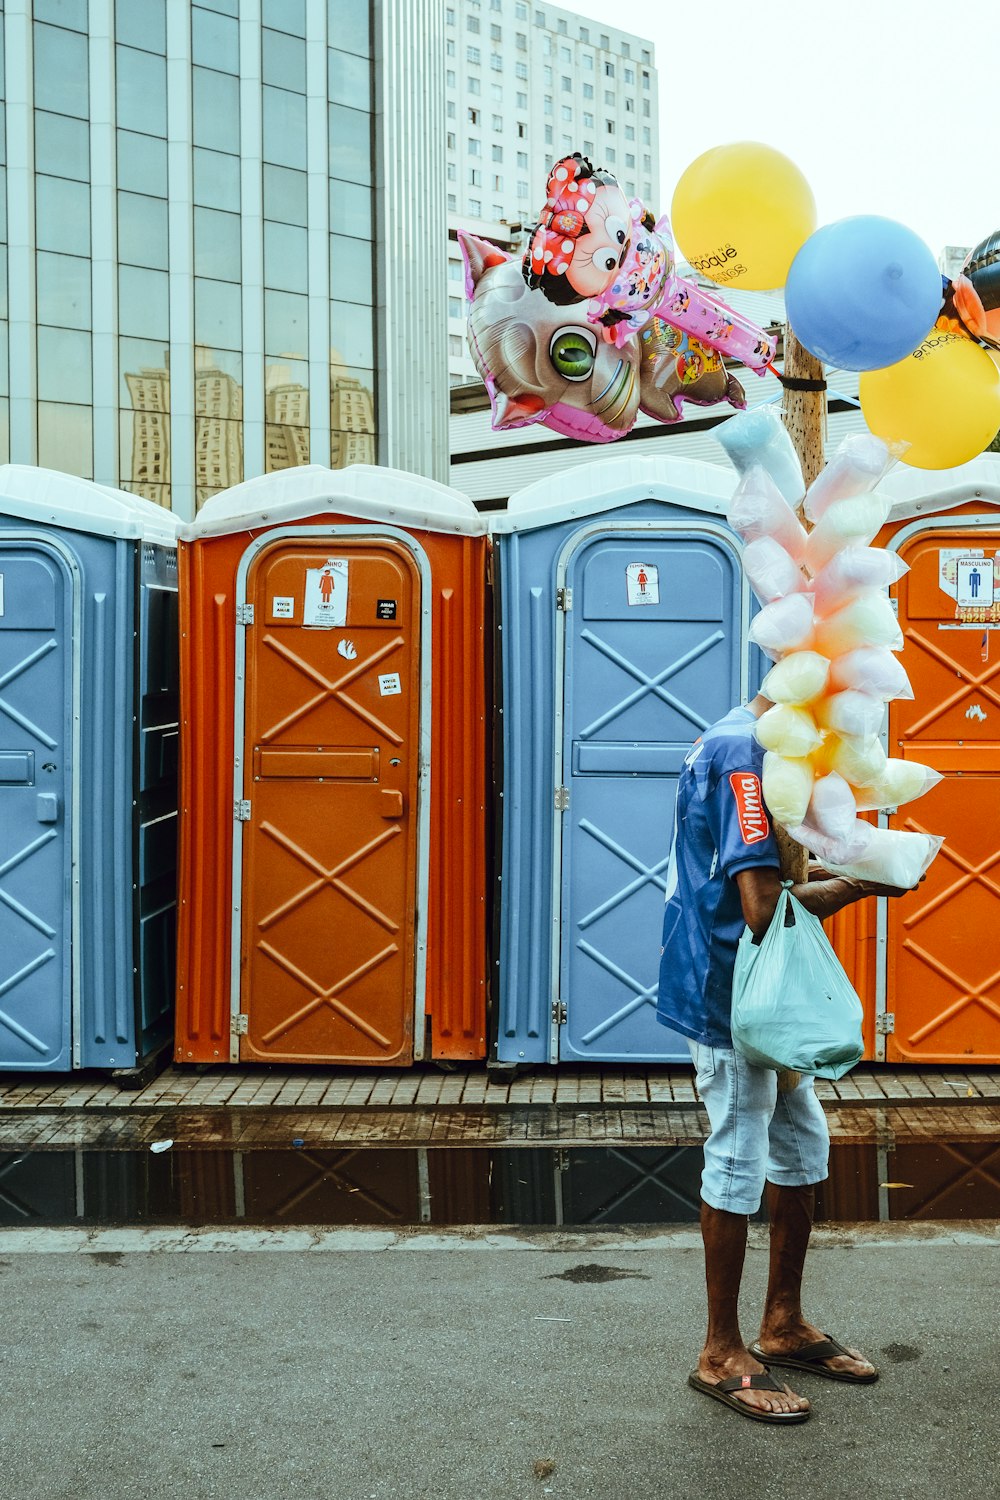 a person standing in front of a row of portable toilets